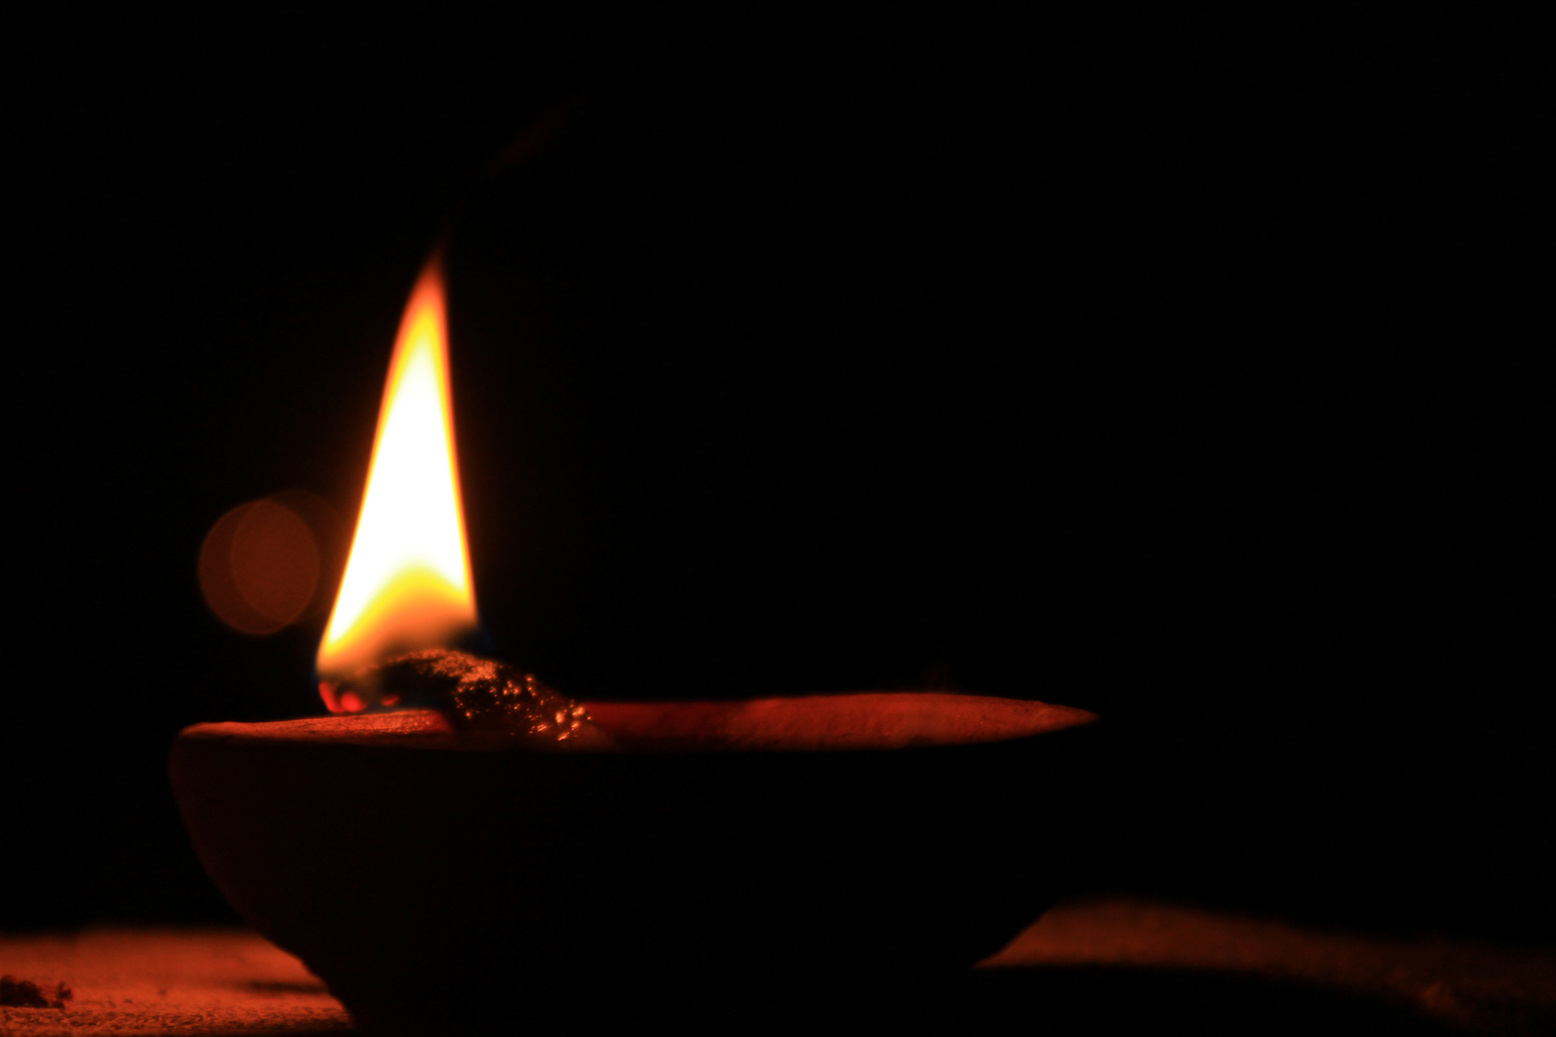 Bright burning wooden stick on stone bowl in darkness